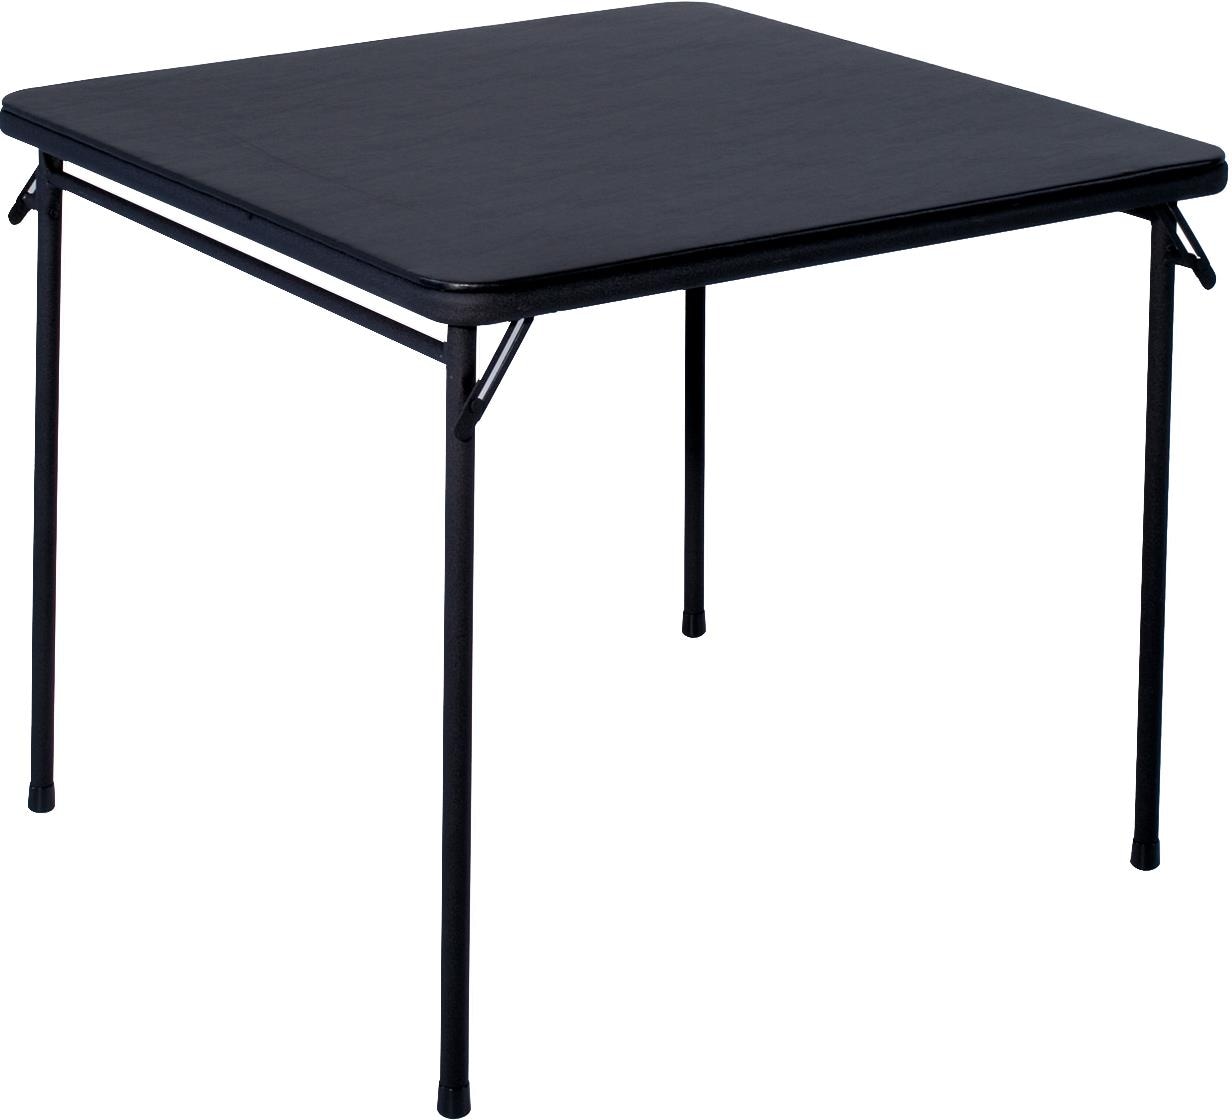 Pet Grooming Table, Foldable 30 Inch Rubber Mat Pet Table with Arm, Black 